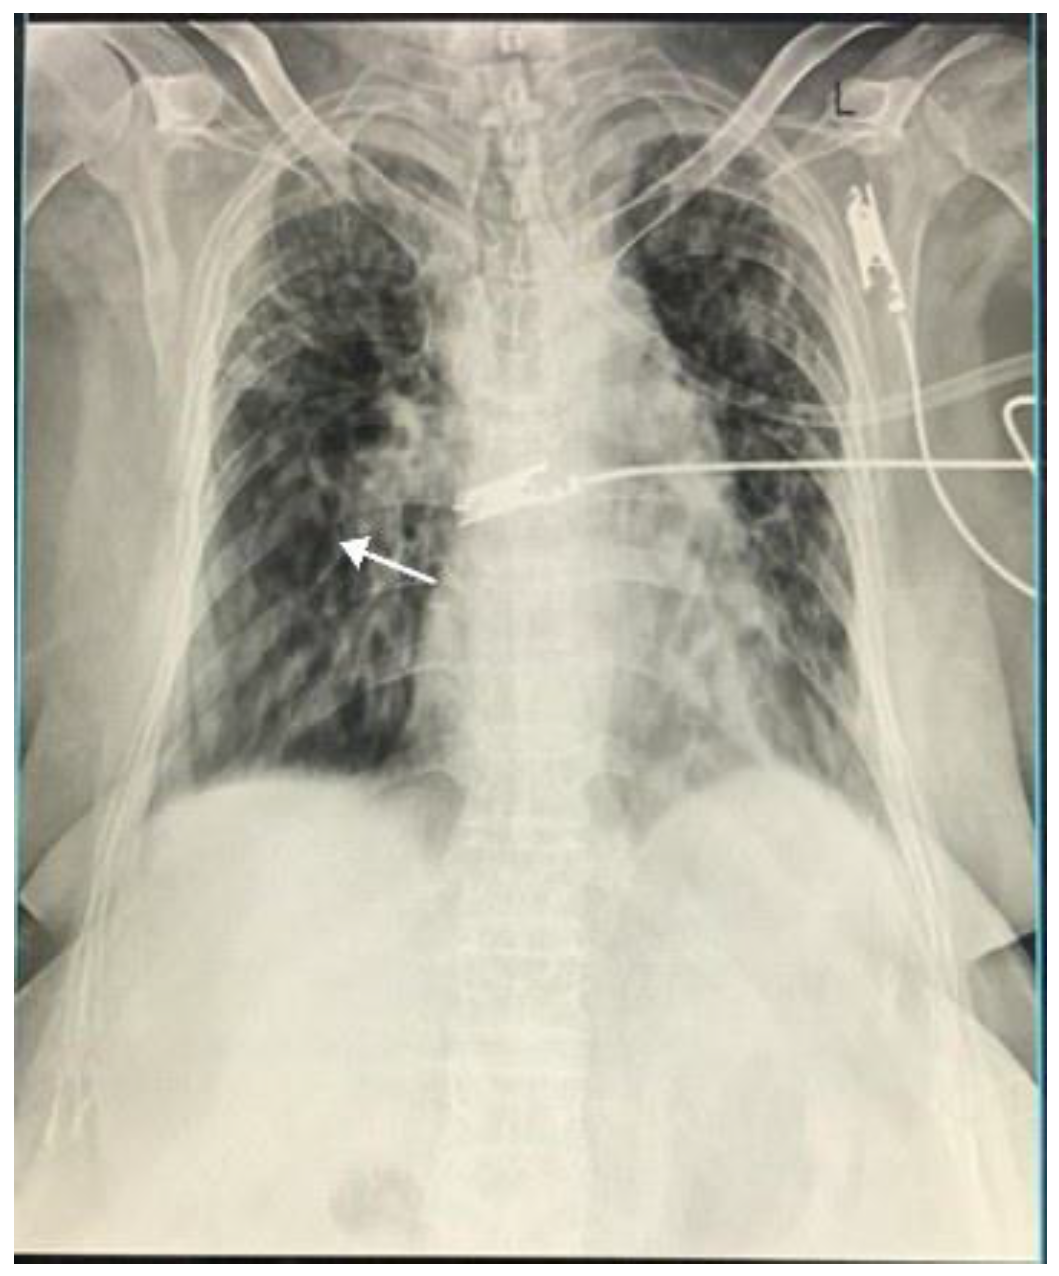 JoR | Free Full-Text | An Interesting Case of Allergic Bronchopulmonary  Aspergillosis Resulting in Type II Respiratory Failure